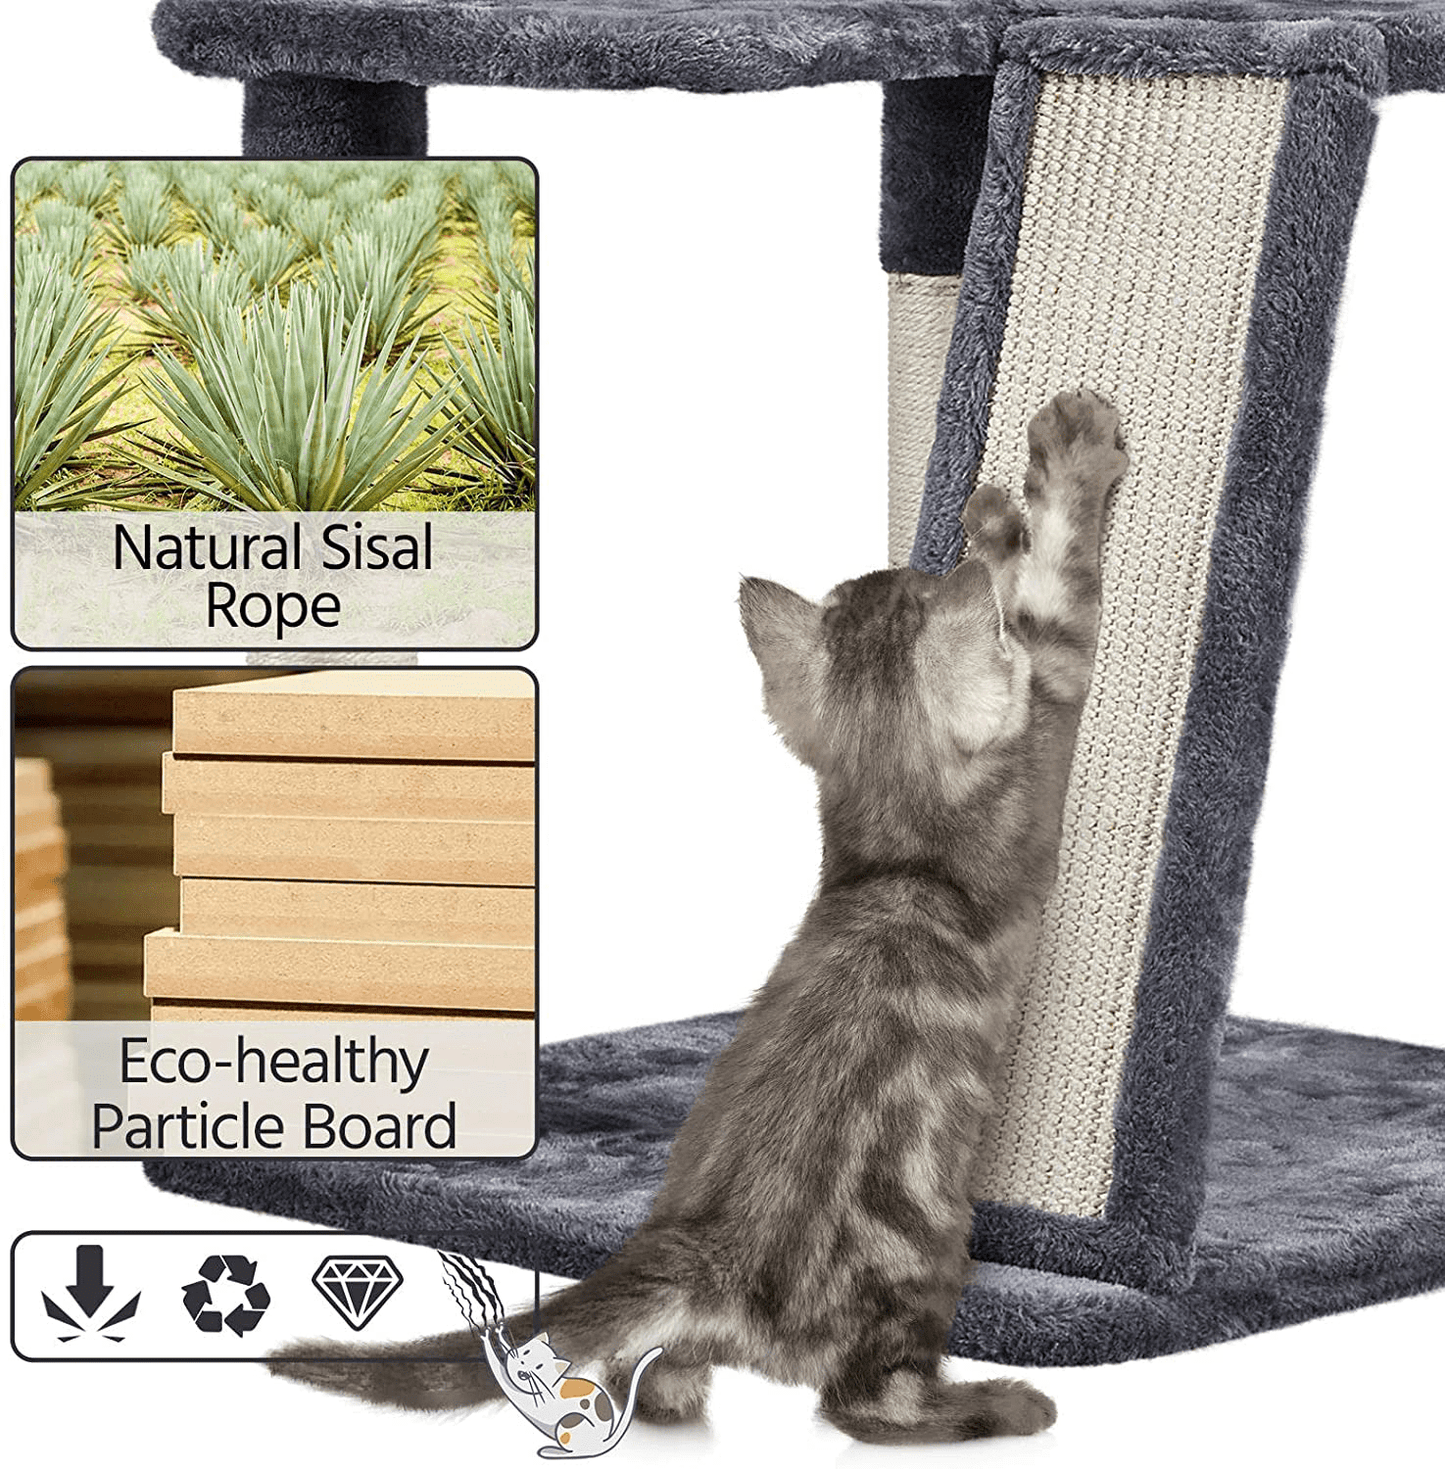 YAHEETECH 38In Cat Tree Tower with Oversized Plush Perch, Sisal-Covered Scratching Posts & Ramp, Basket, Stable Cat Condo Cat Climber Stand for Kittens Cats Pets Animals & Pet Supplies > Pet Supplies > Cat Supplies > Cat Furniture Yaheetech   